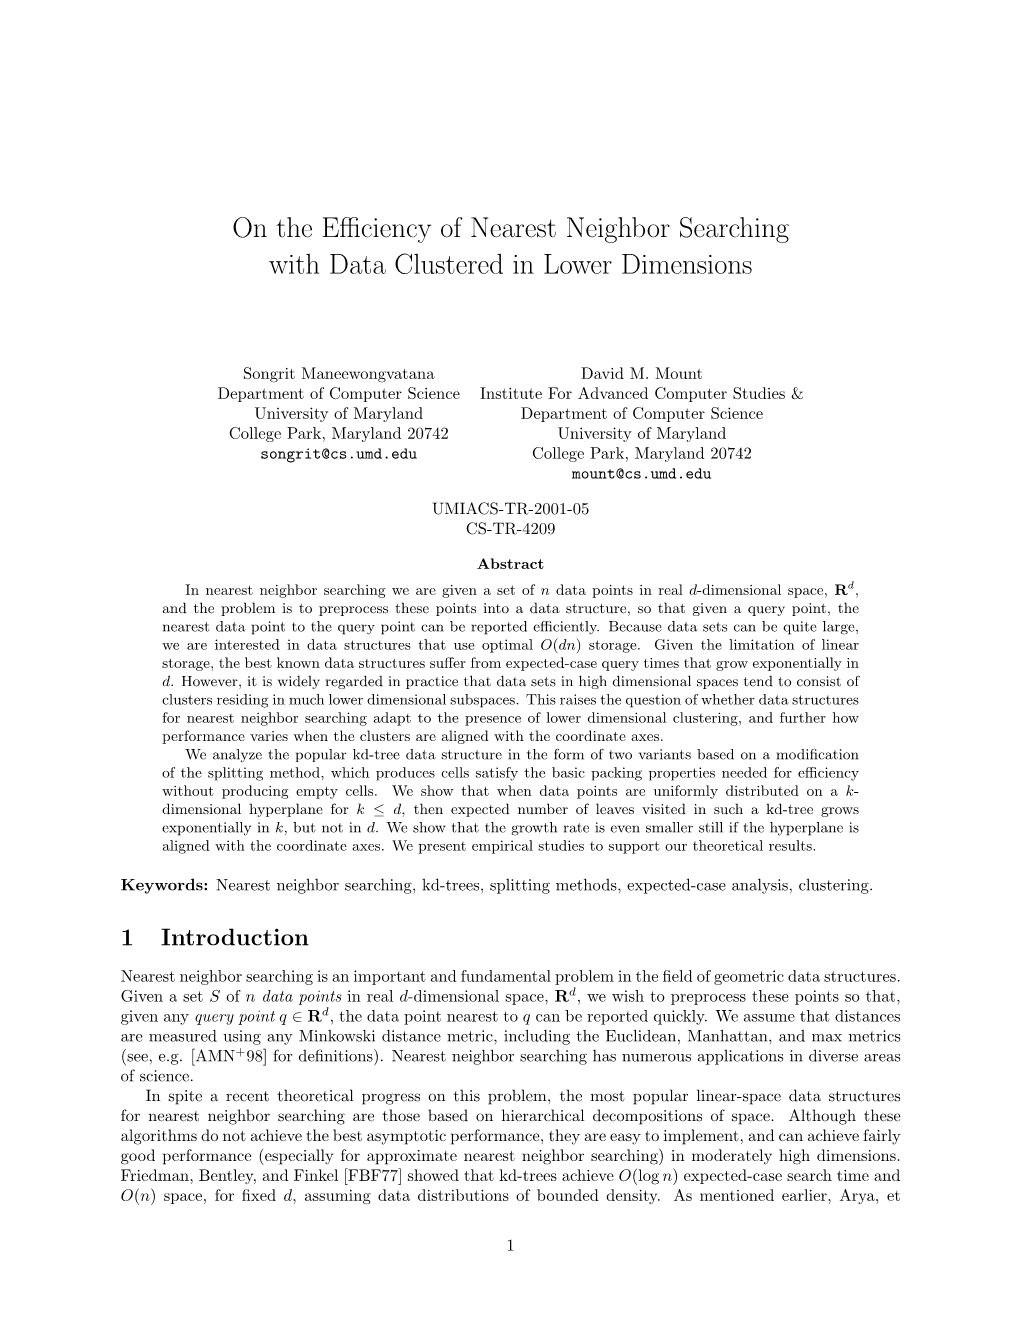 On the Efficiency of Nearest Neighbor Searching with Data Clustered In